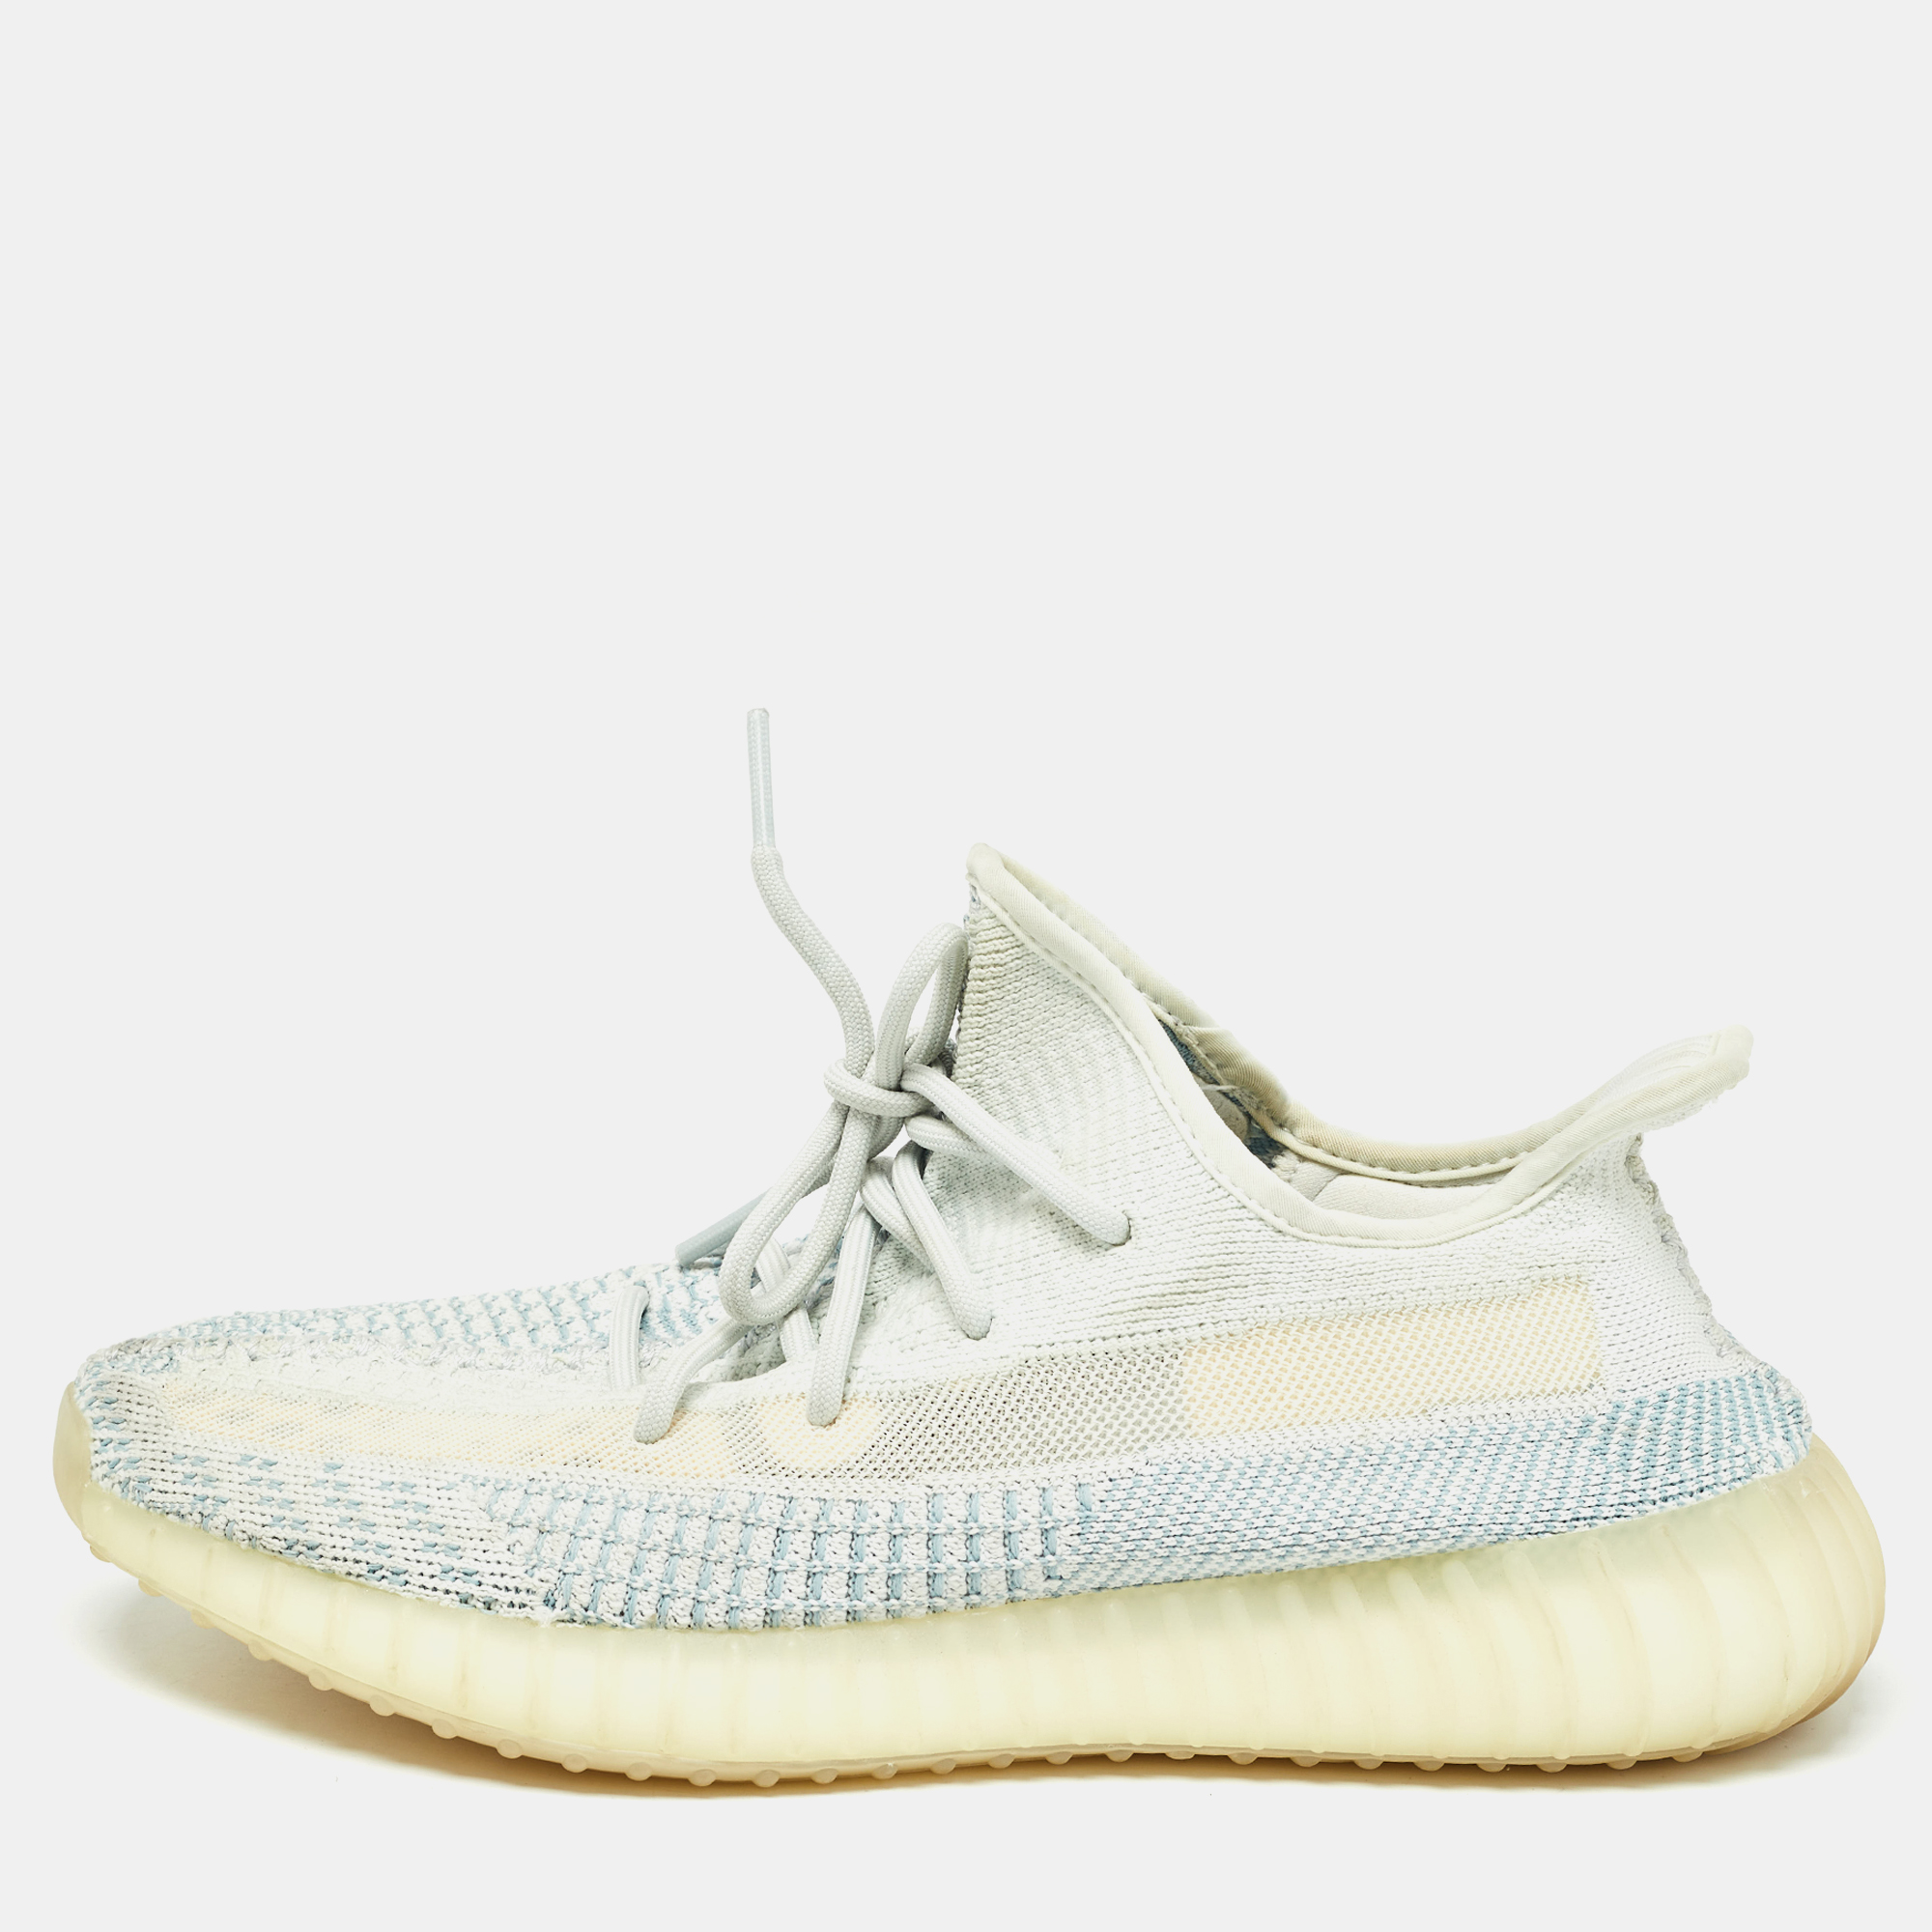 Pre-owned Yeezy X Adidas White/green Knit Fabric Boost 350 V2 Cloud White Non Reflective Sneakers Size 44